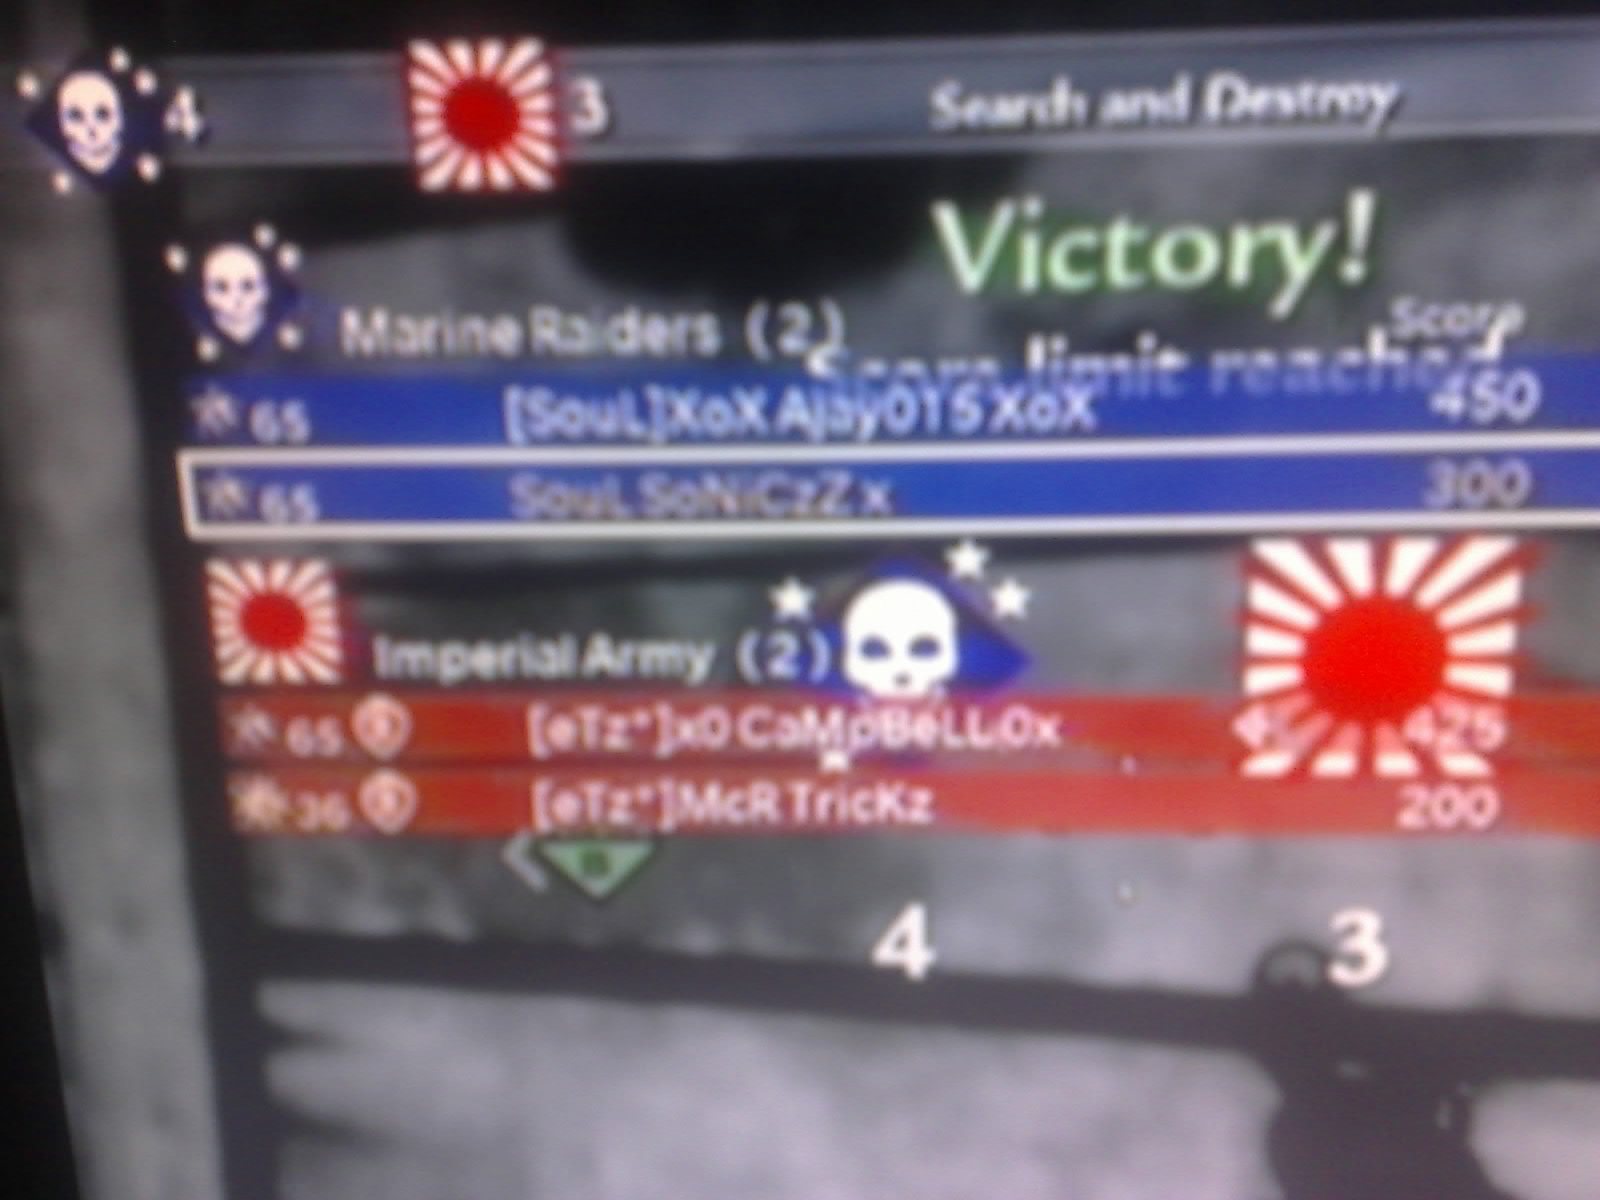 We win 2nd and third map and they dispute :S . . only have pics for 2nd map because they dashboarded it 